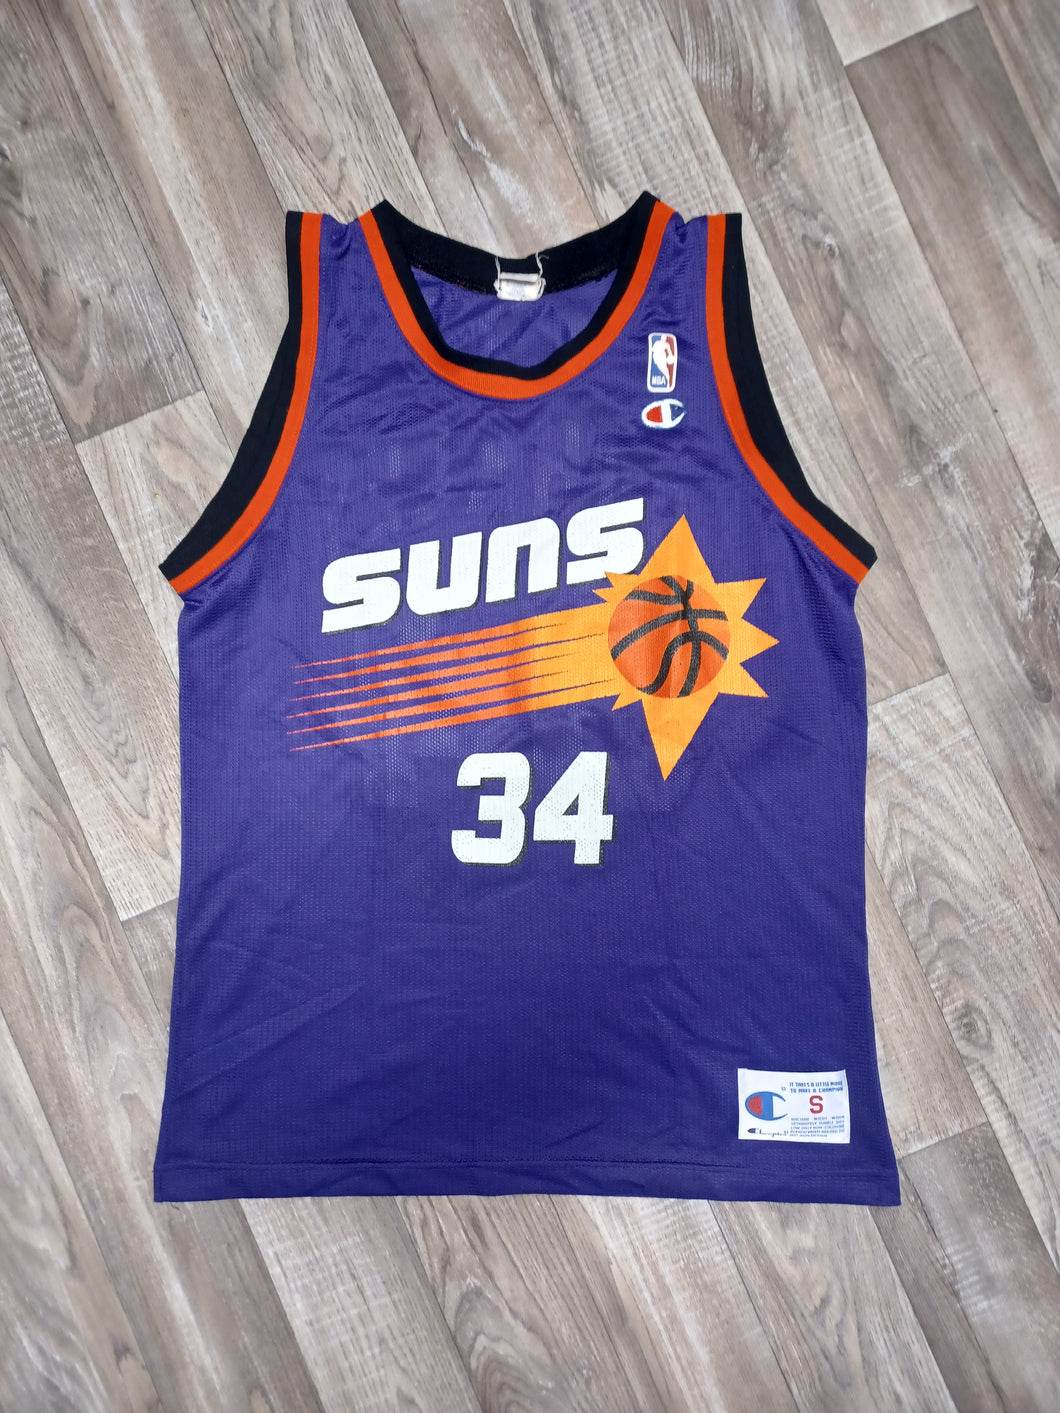 🏀 Charles Barkley Phoenix Suns Jersey Size Small – The Throwback